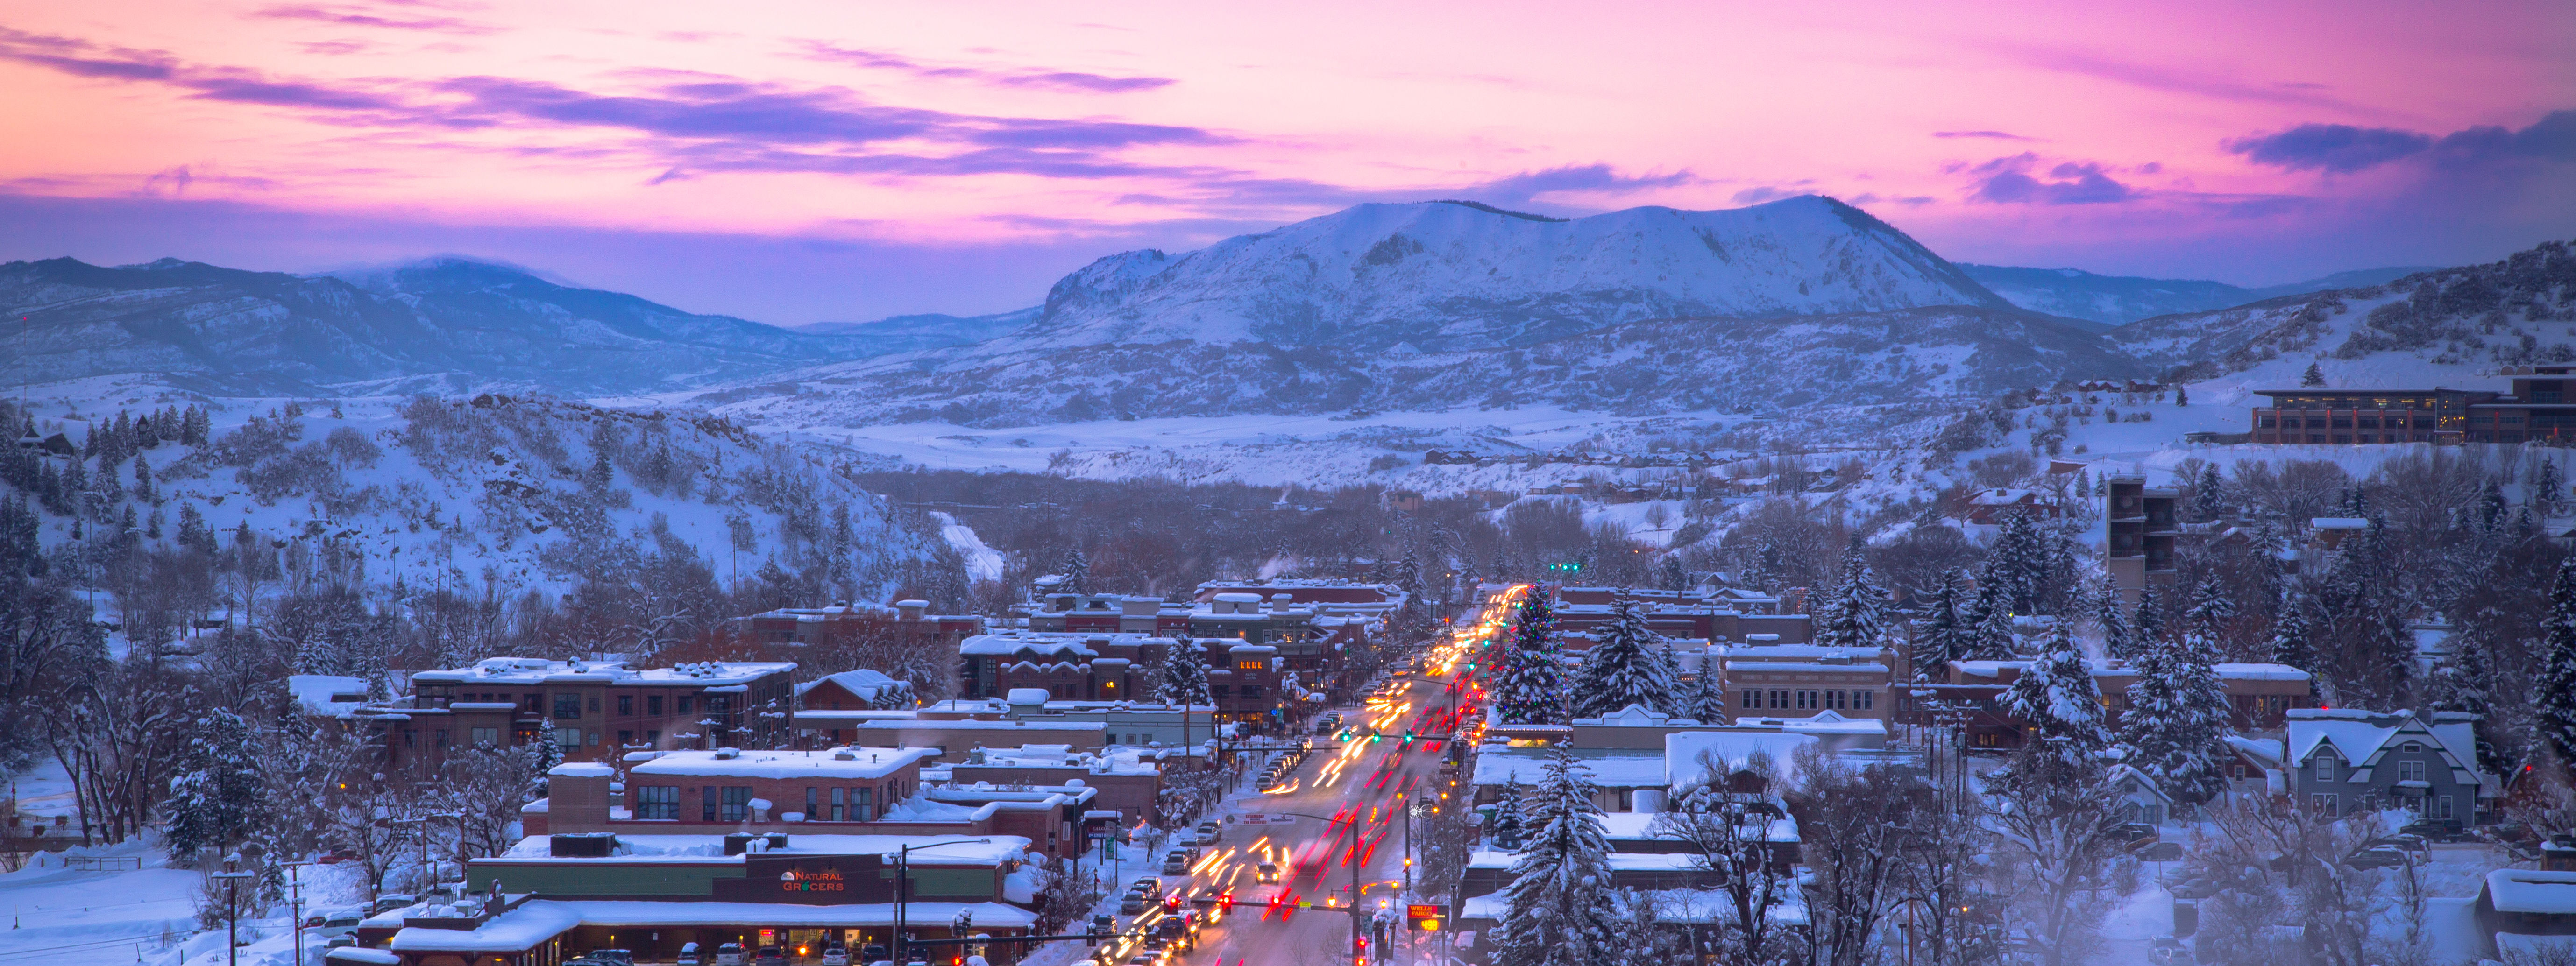 Winter transportation options in Steamboat Springs